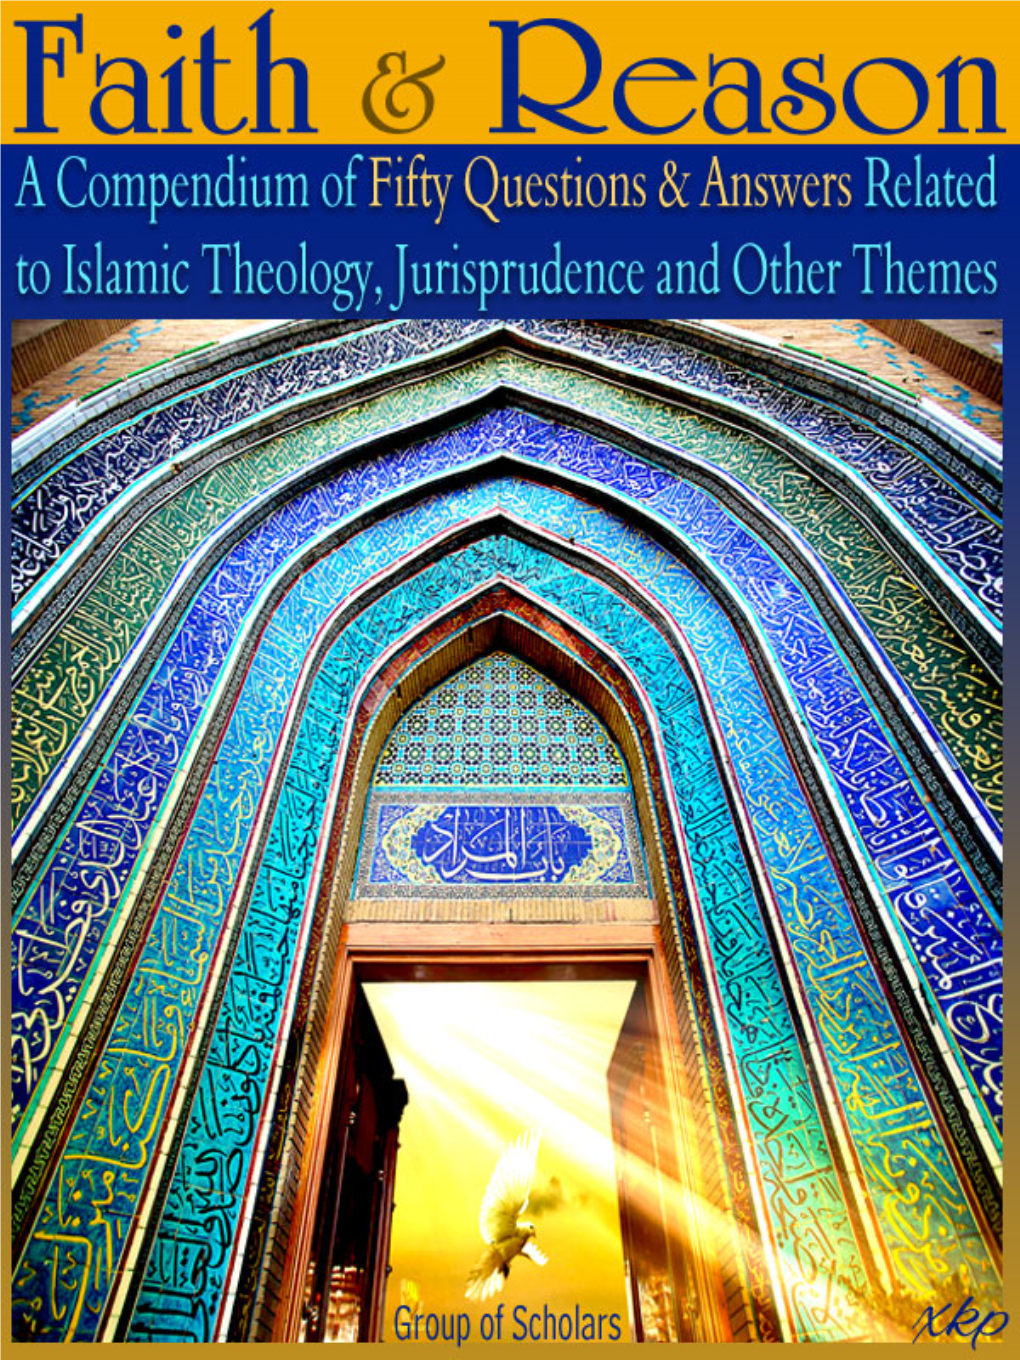 Faith and Reason – a Compendium of Fifty Ques- Tions and Answers Related to Islamic Theology, Jurisprudence and Other Themes’ Is Timely, in Offering Some Explanations